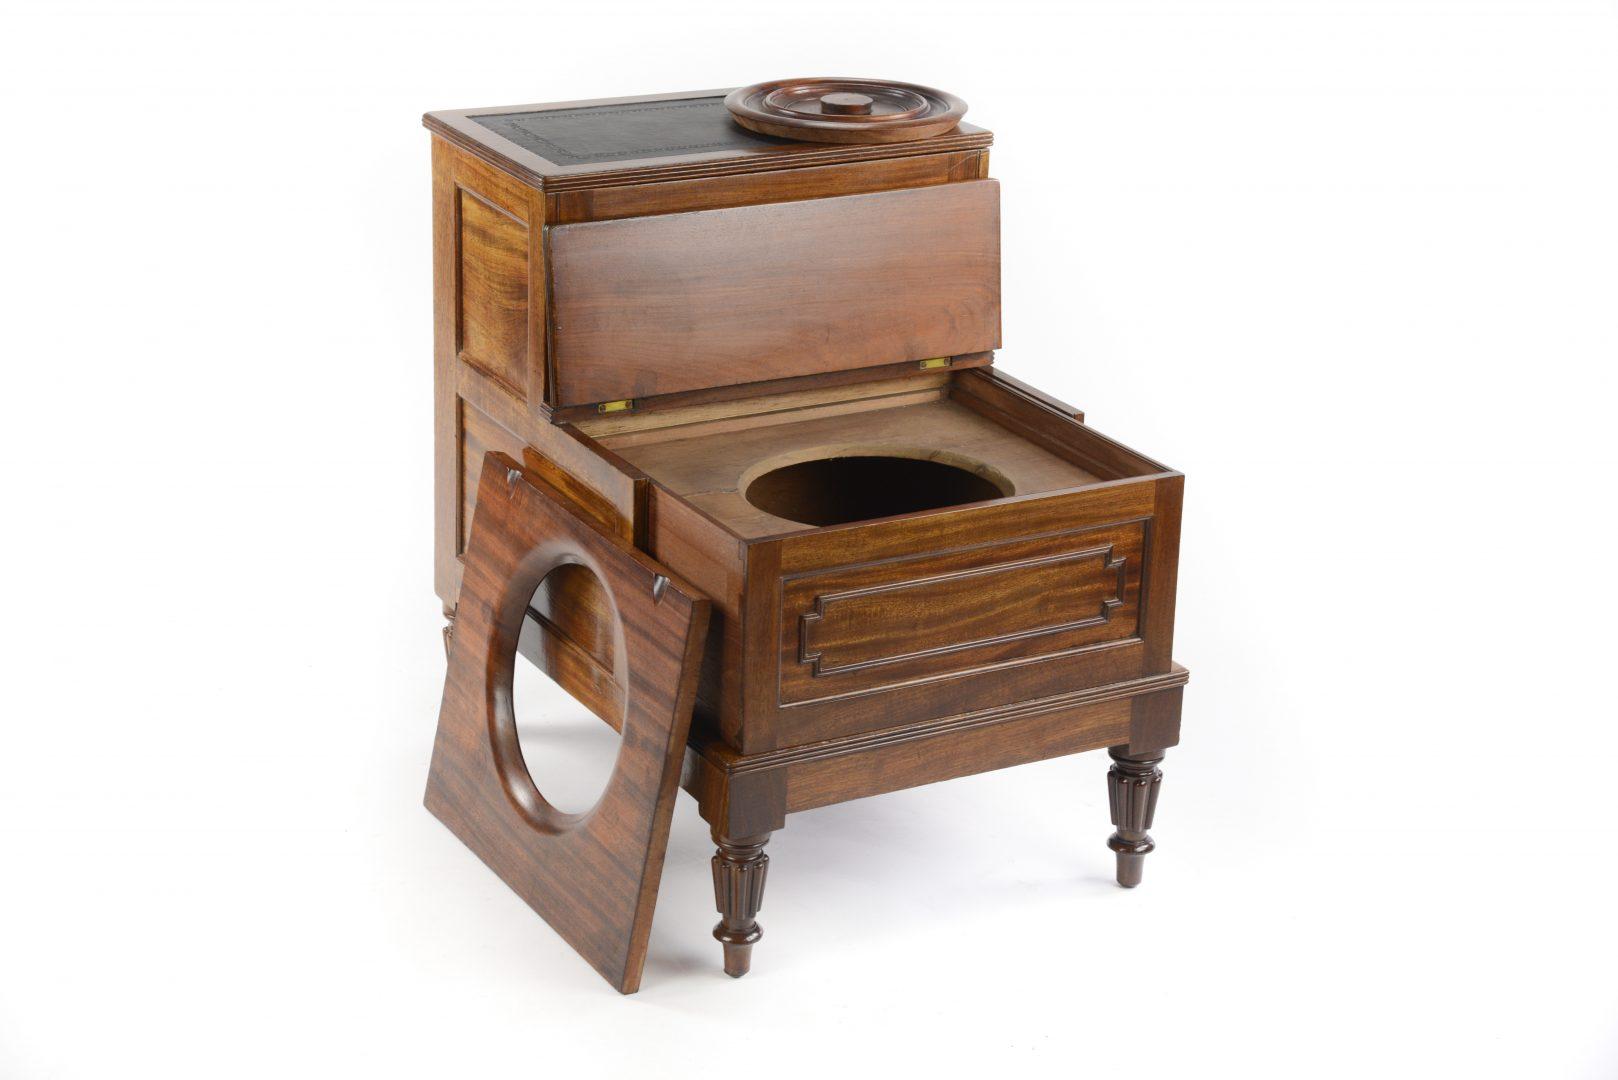 George IV George iv Mahogany Stepped Commode, Attributed to Gillows of Lancaster